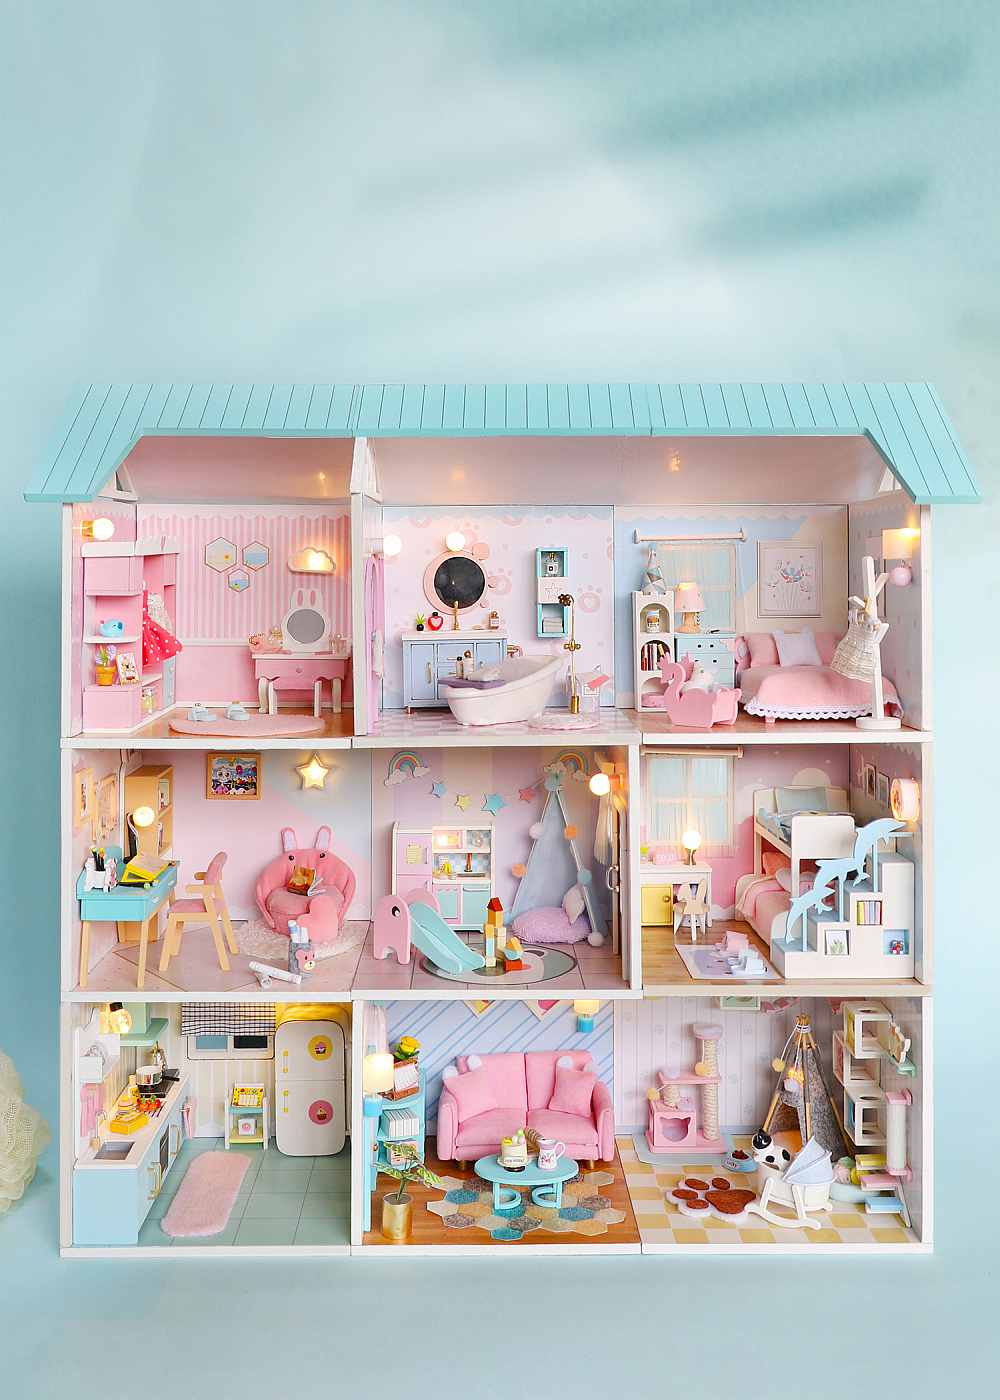 DIY Wooden Miniature "Cosy Bathroom" (S2010) Doll house toy w/ LEDs, Glue and Dust Cover Birthday Gift